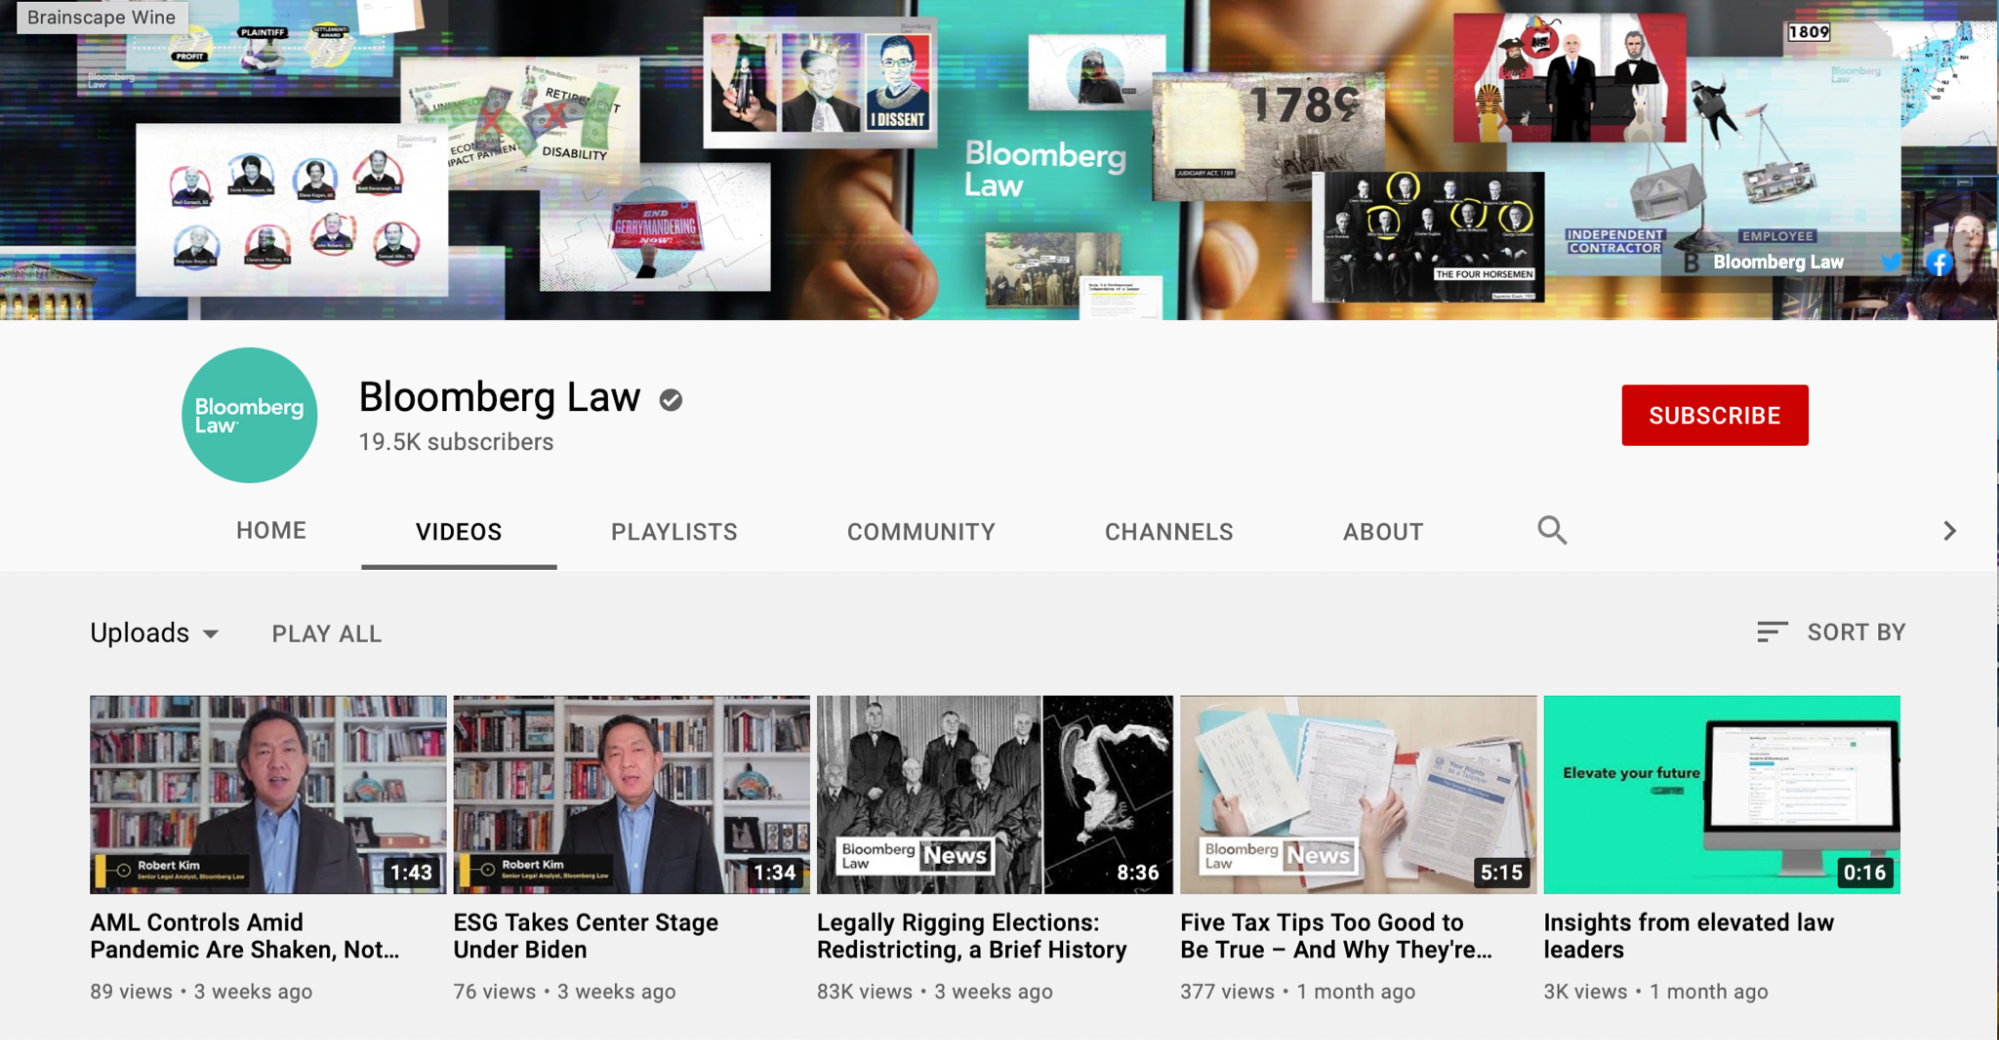 Bloomberg law youtube channel videos screen